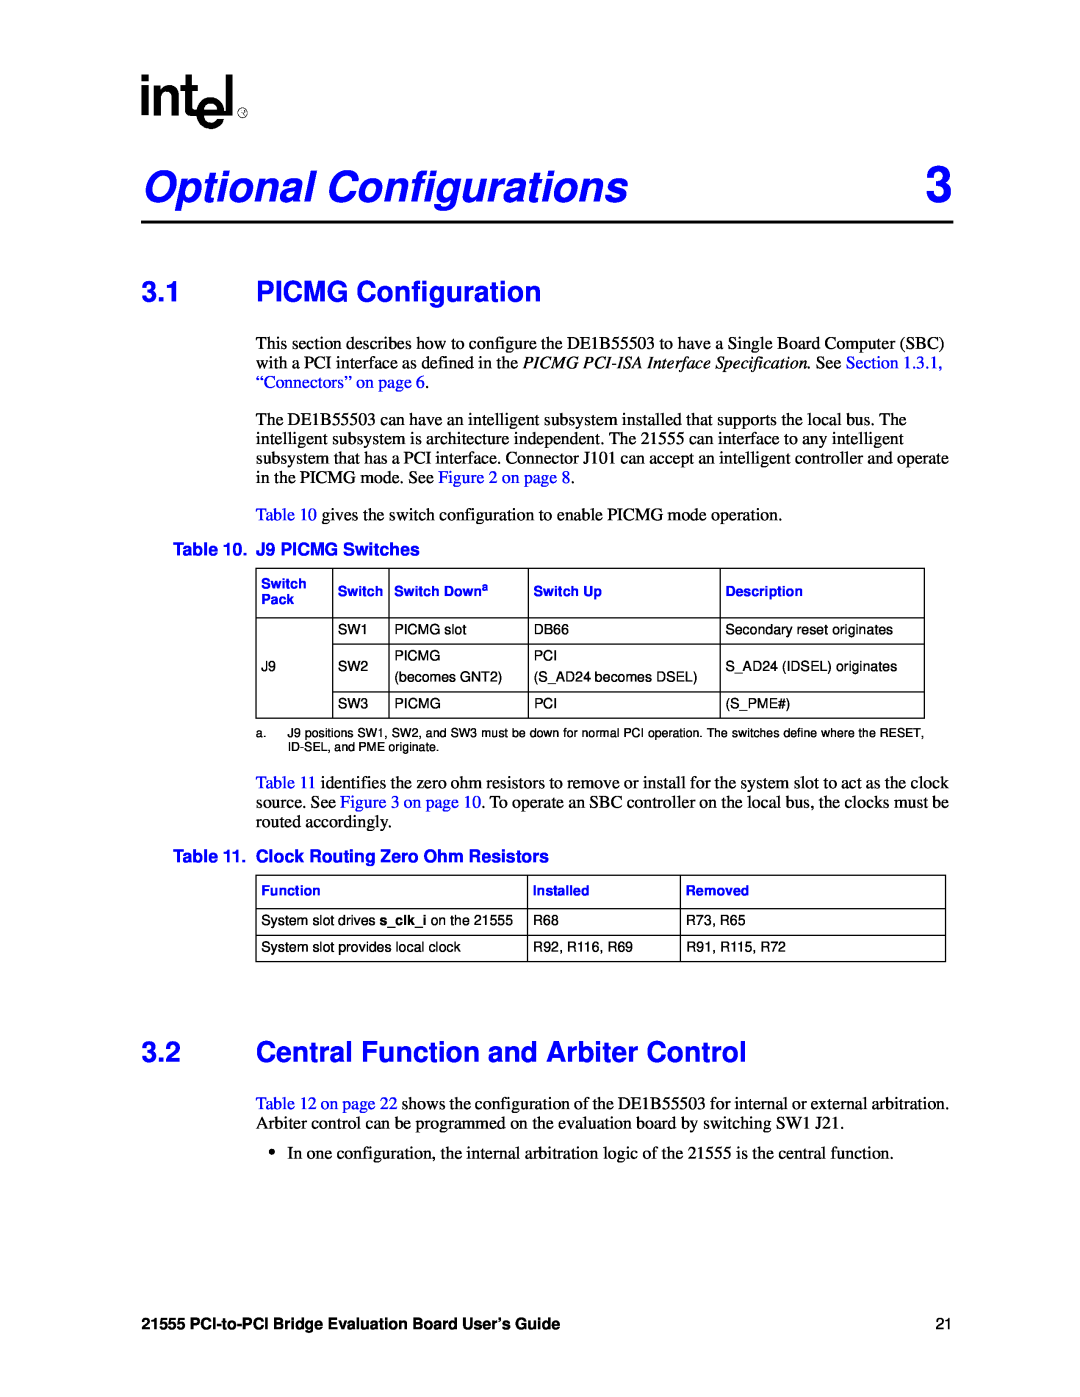 Intel 21555 manual Optional Configurations, PICMG Configuration, Central Function and Arbiter Control 